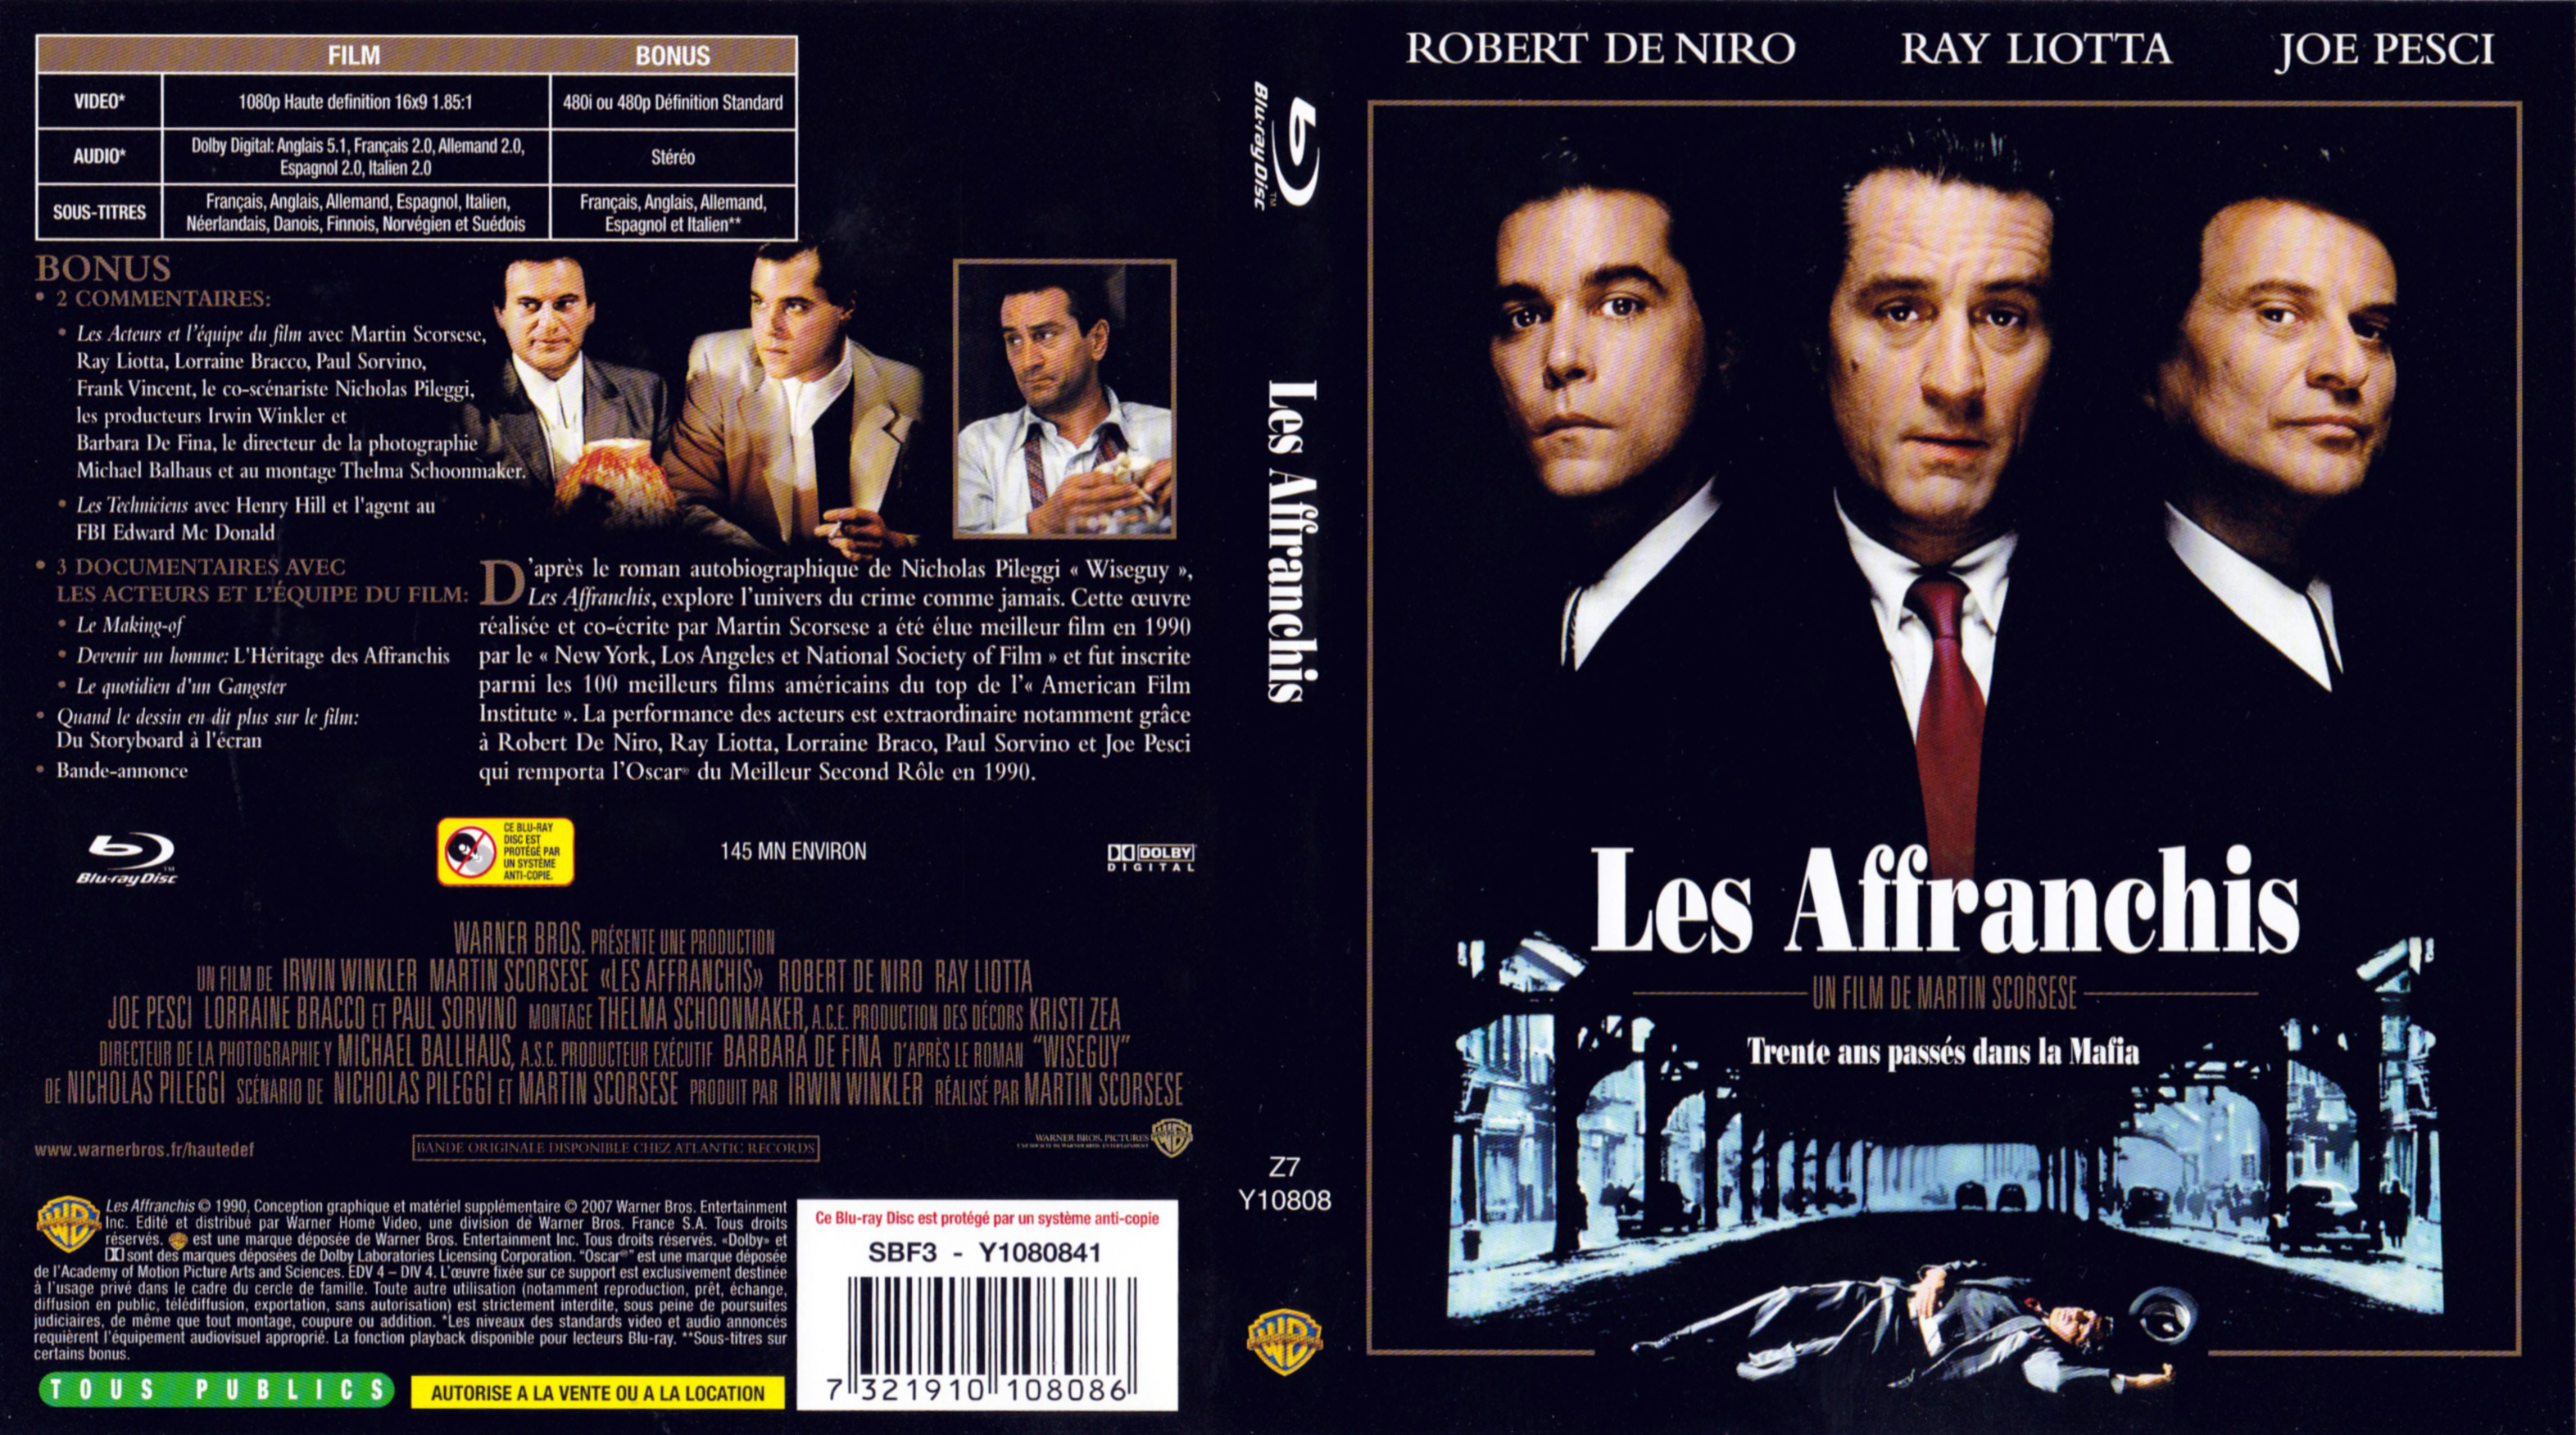 Jaquette DVD Les affranchis (BLU-RAY)